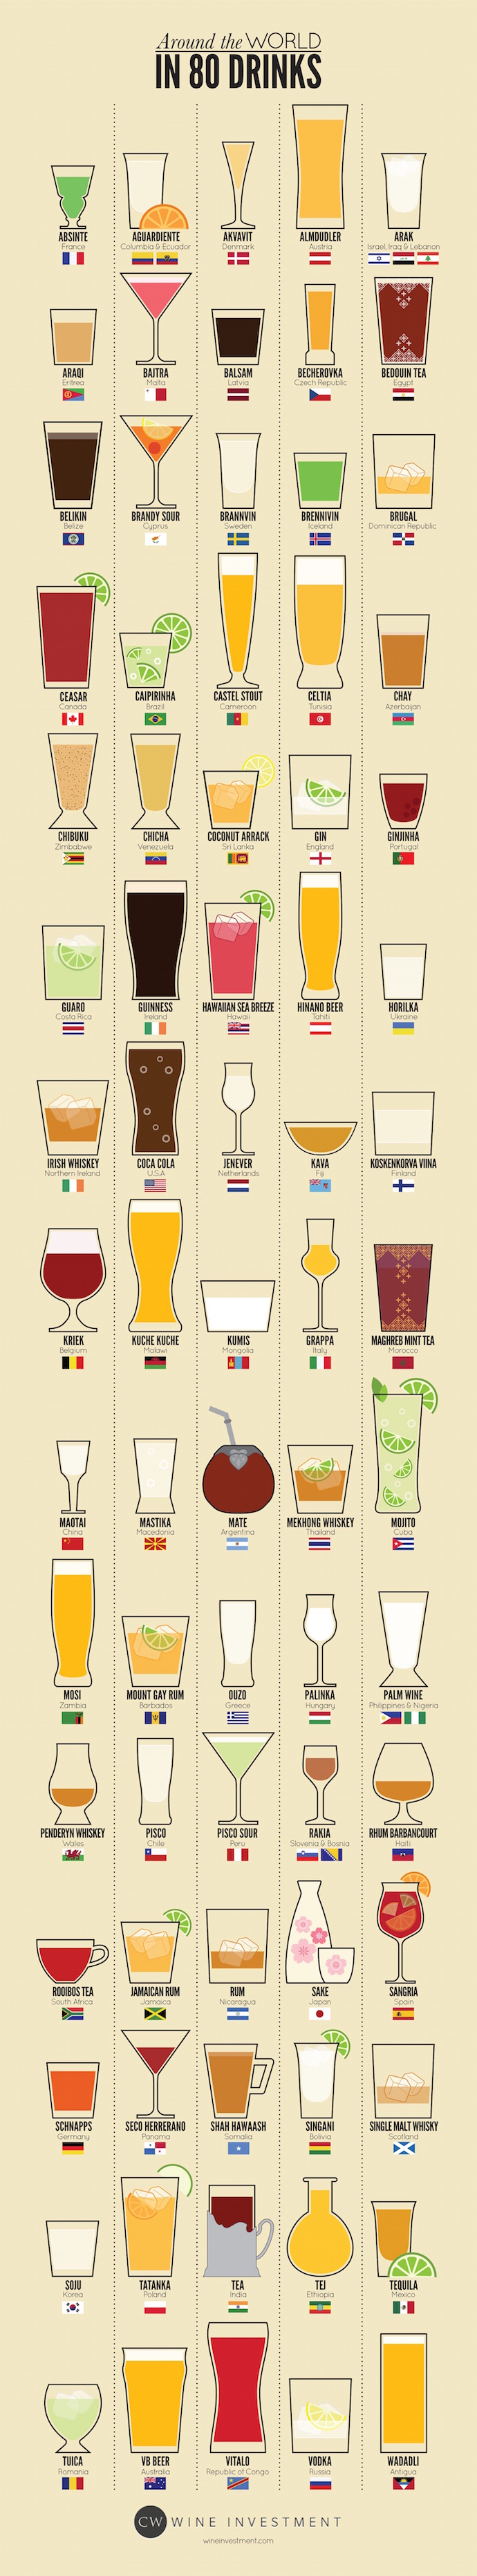 Around-the-world-in-80-drinks-infographic